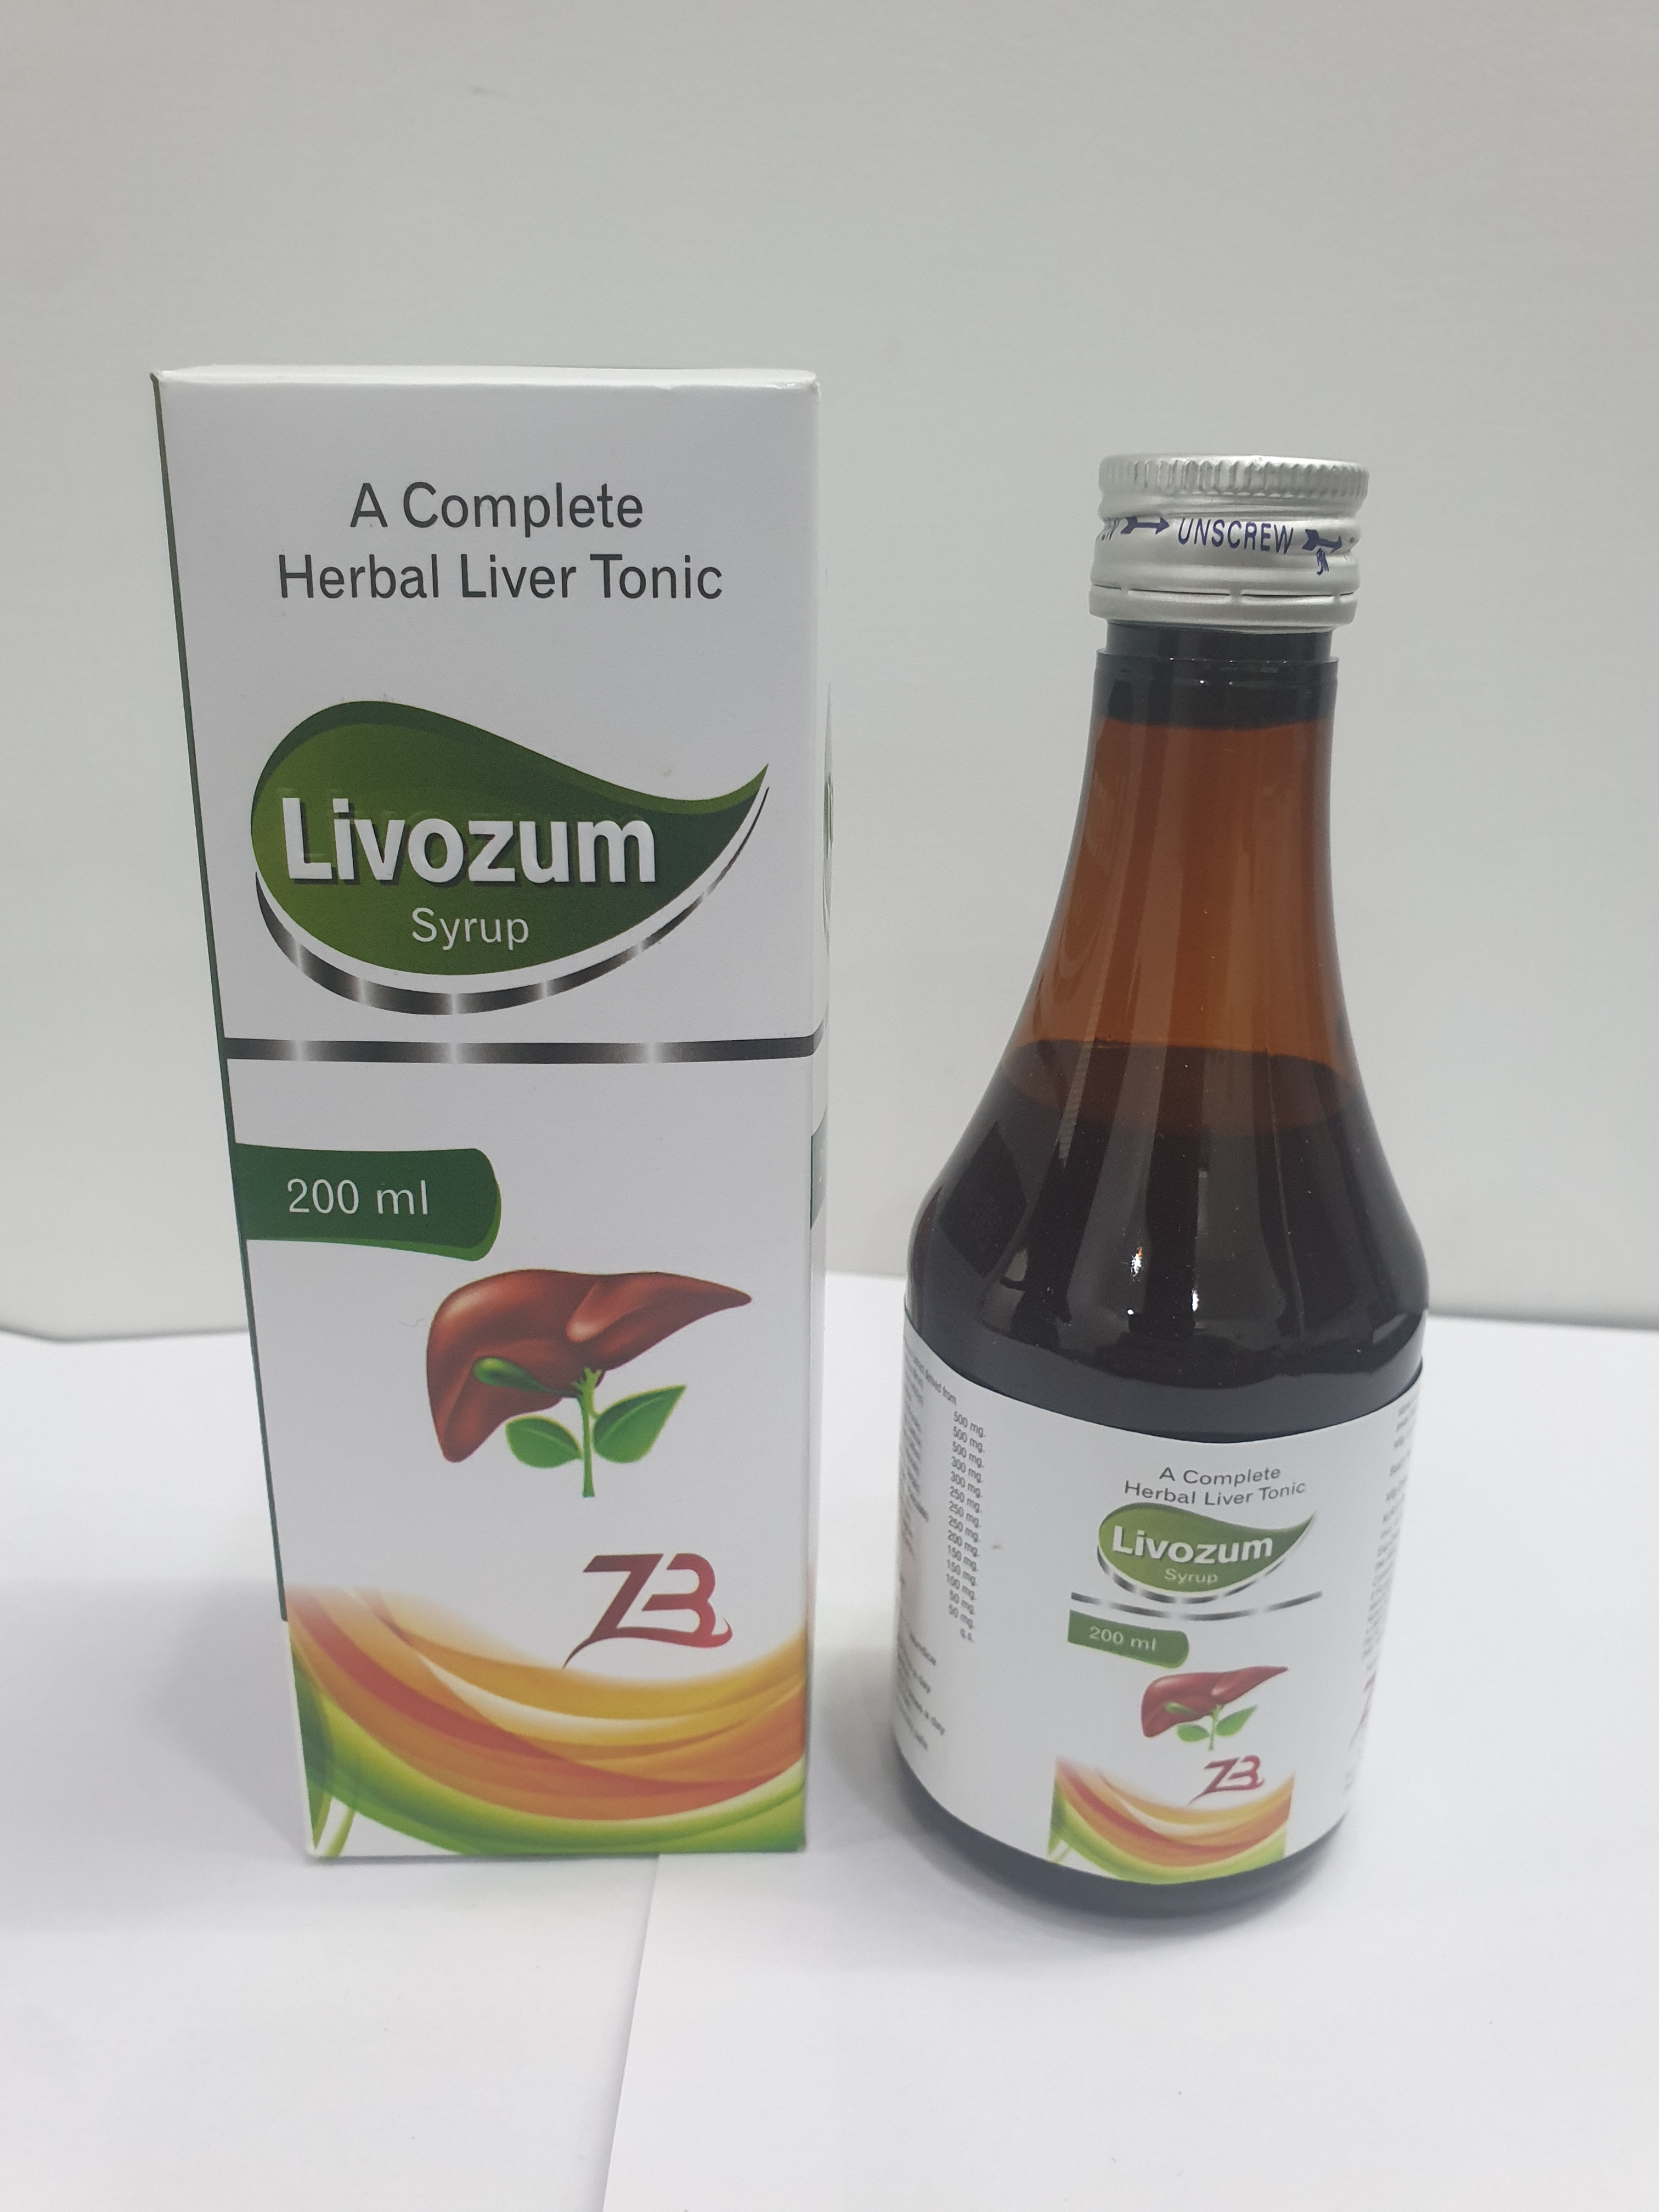 Product Name: Livozum, Compositions of Livozum are A Complete Herbal Liver Tonic - Zumax Biocare